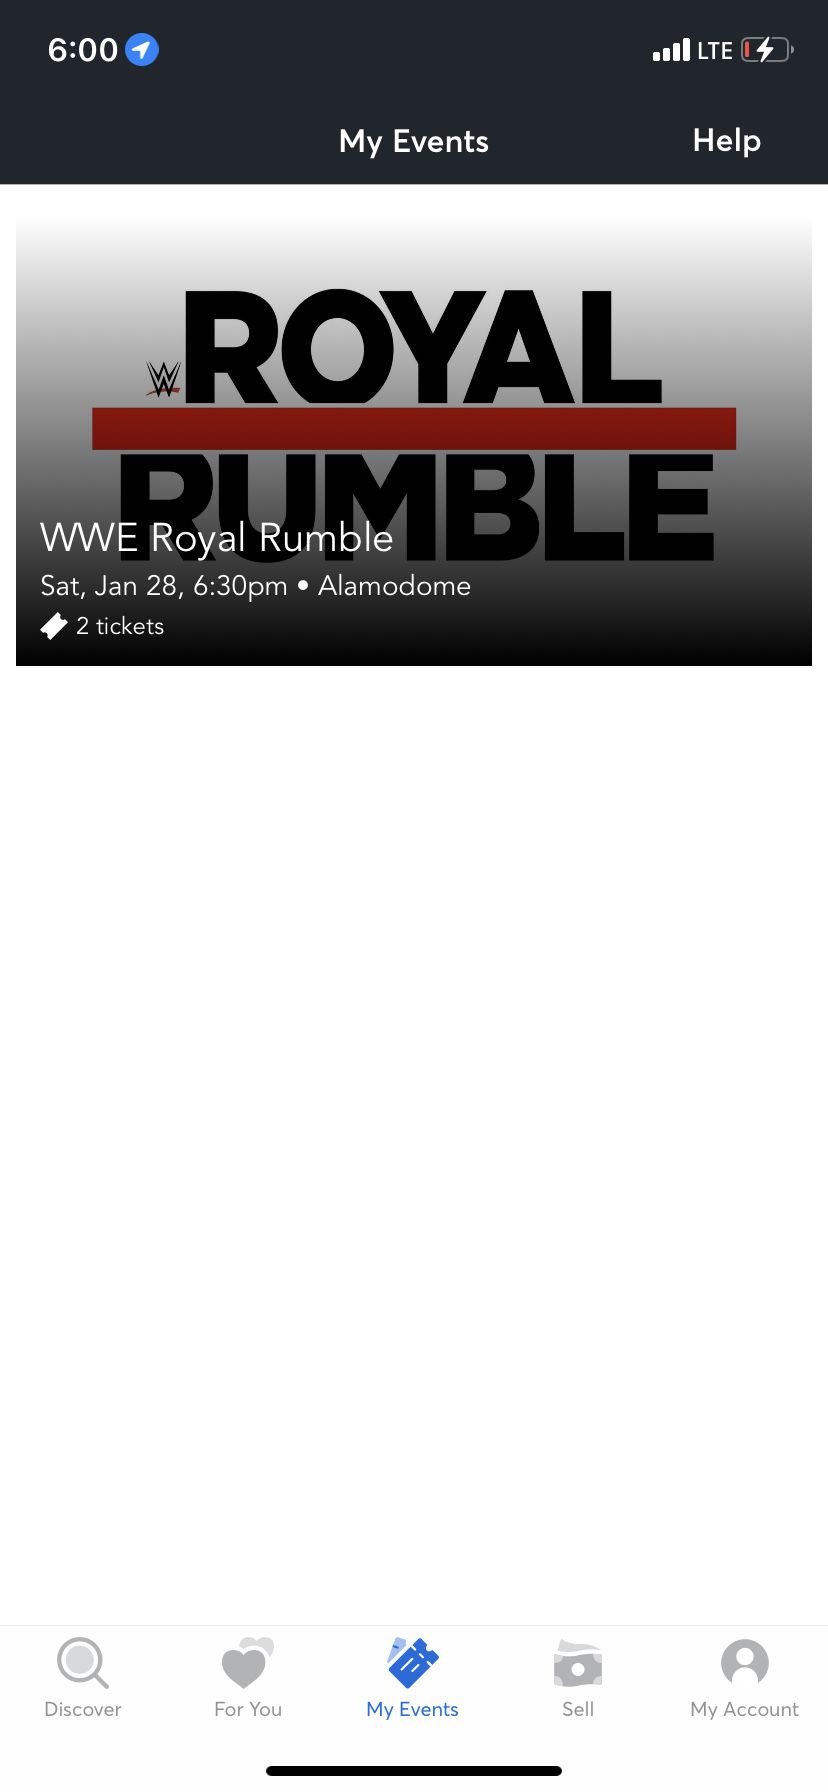 ROYAL RUMBLE TICKETS